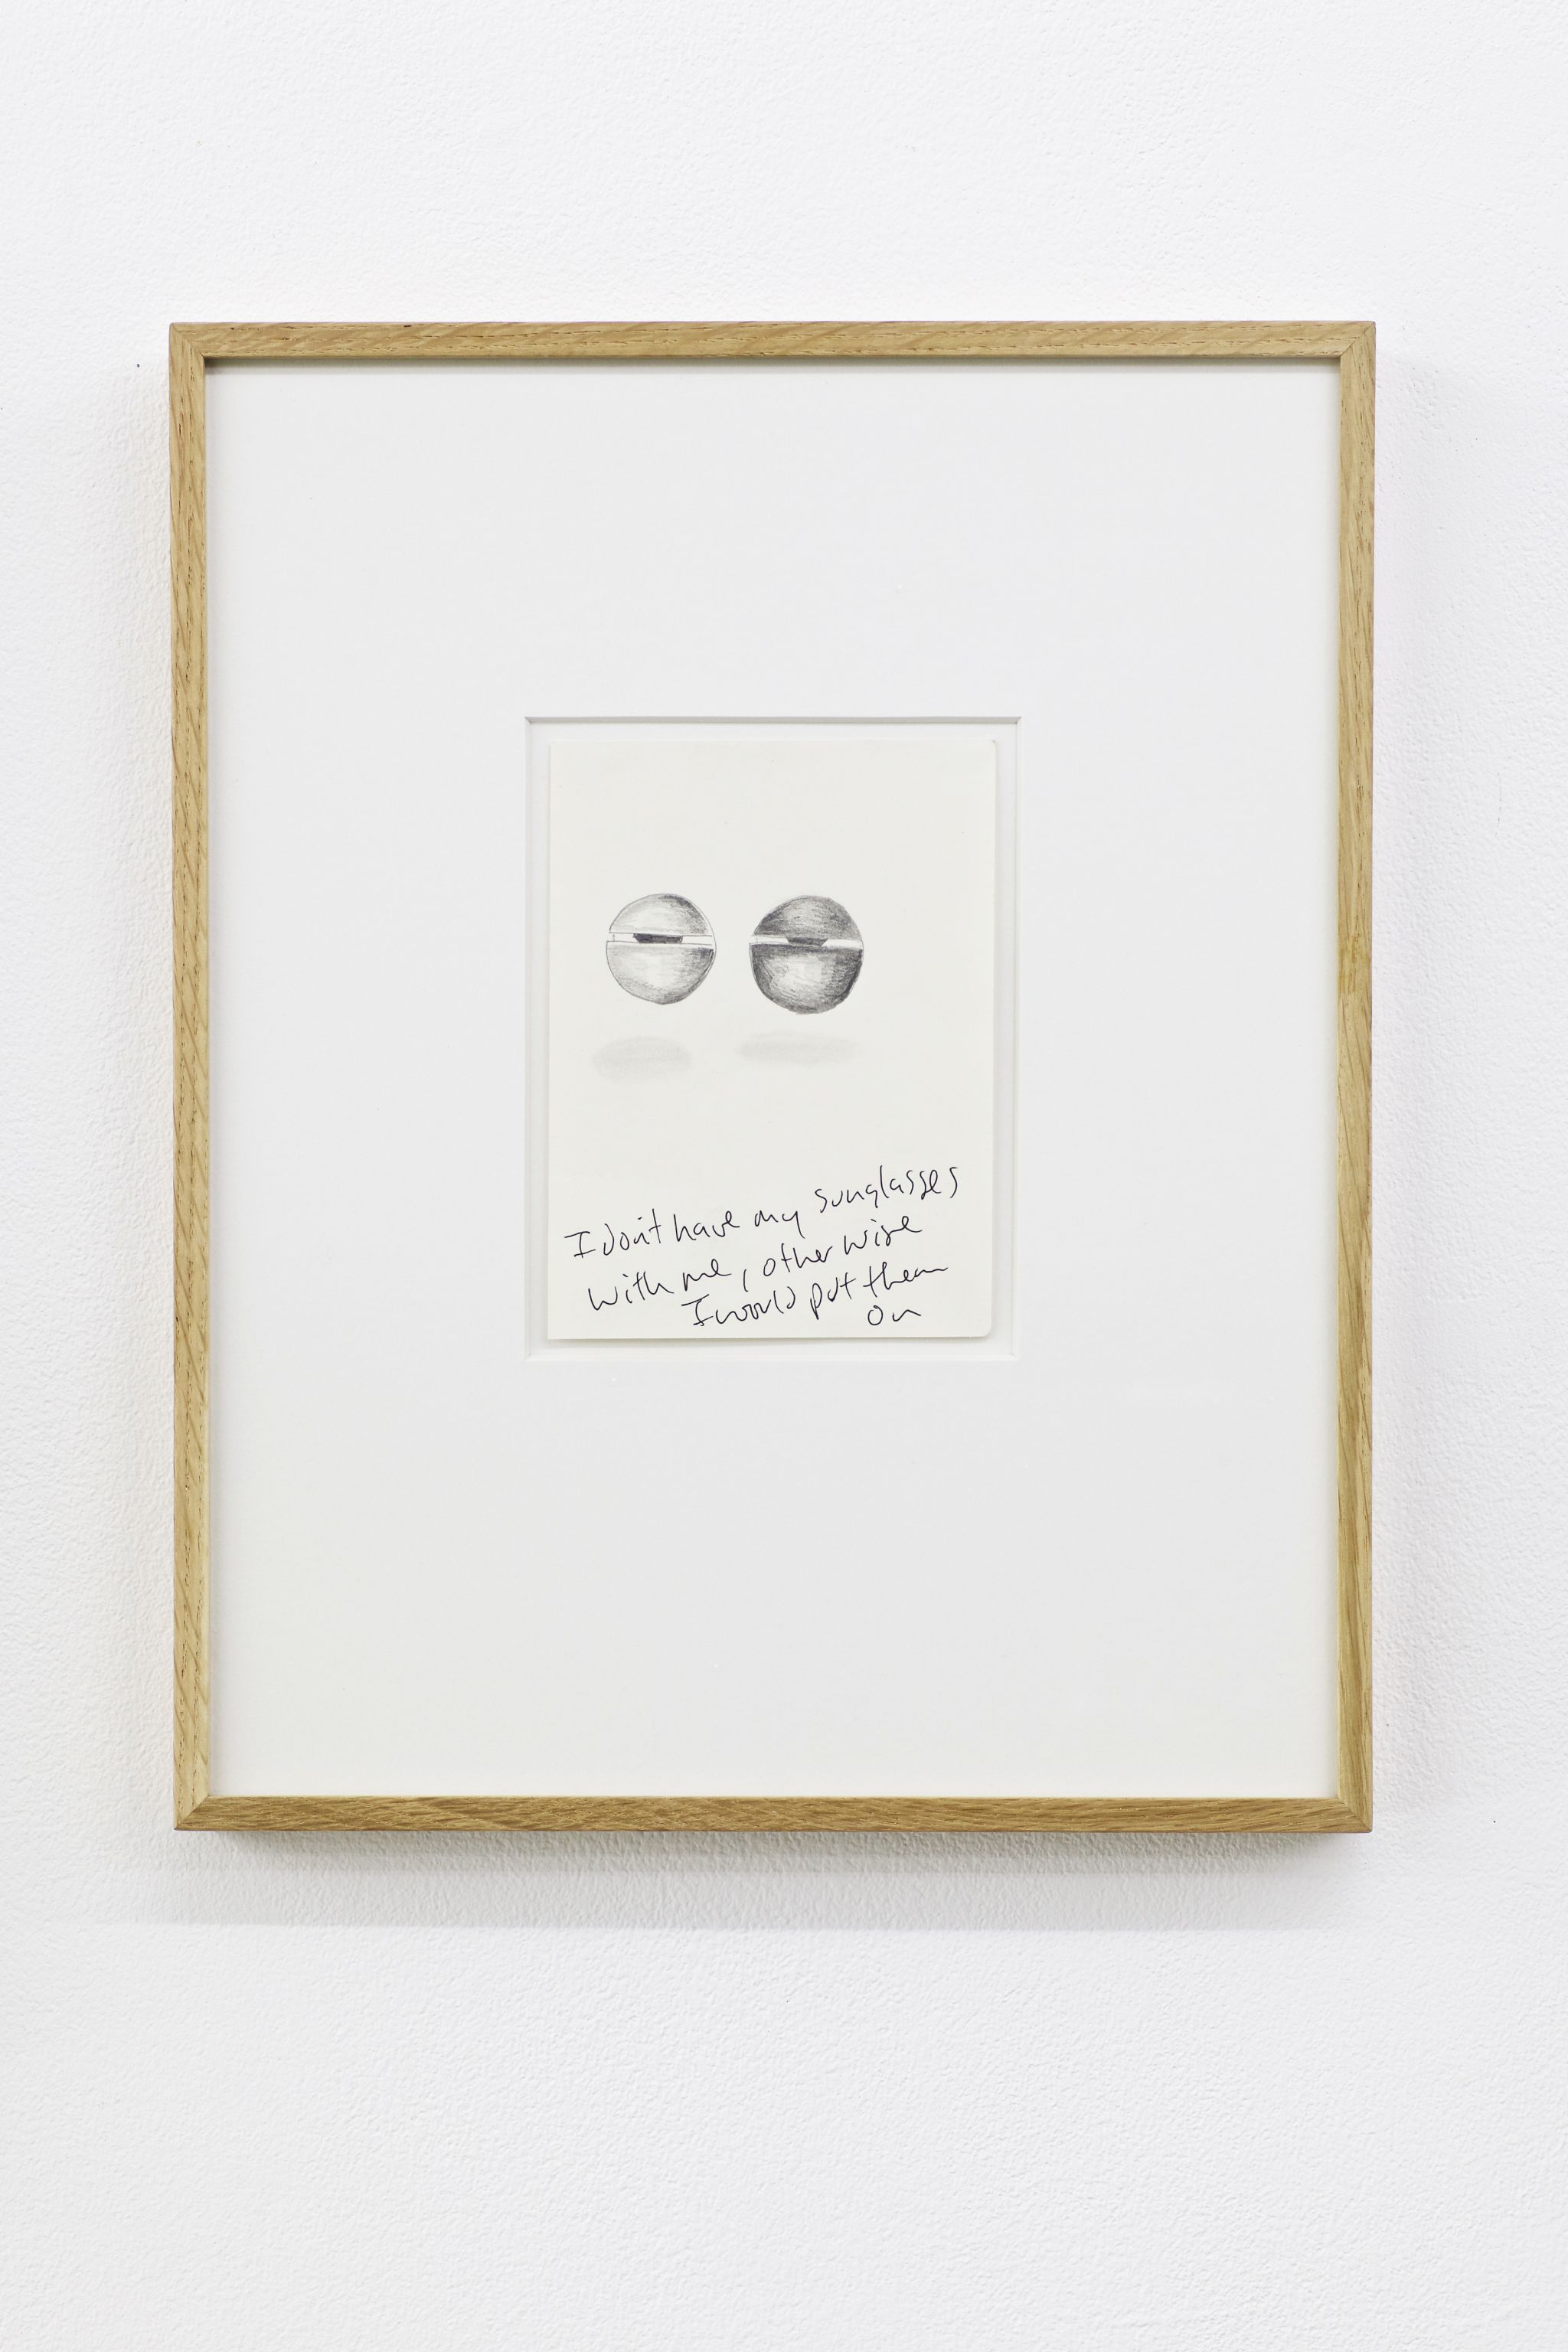 Justin Almquist, I don’t have any sunglasses with me otherwise I would put them on, 2015, Bleistift auf Papier, 13.8 ⁠× ⁠10.3 ⁠⁠cm, framed: 35×27,5 ⁠cm